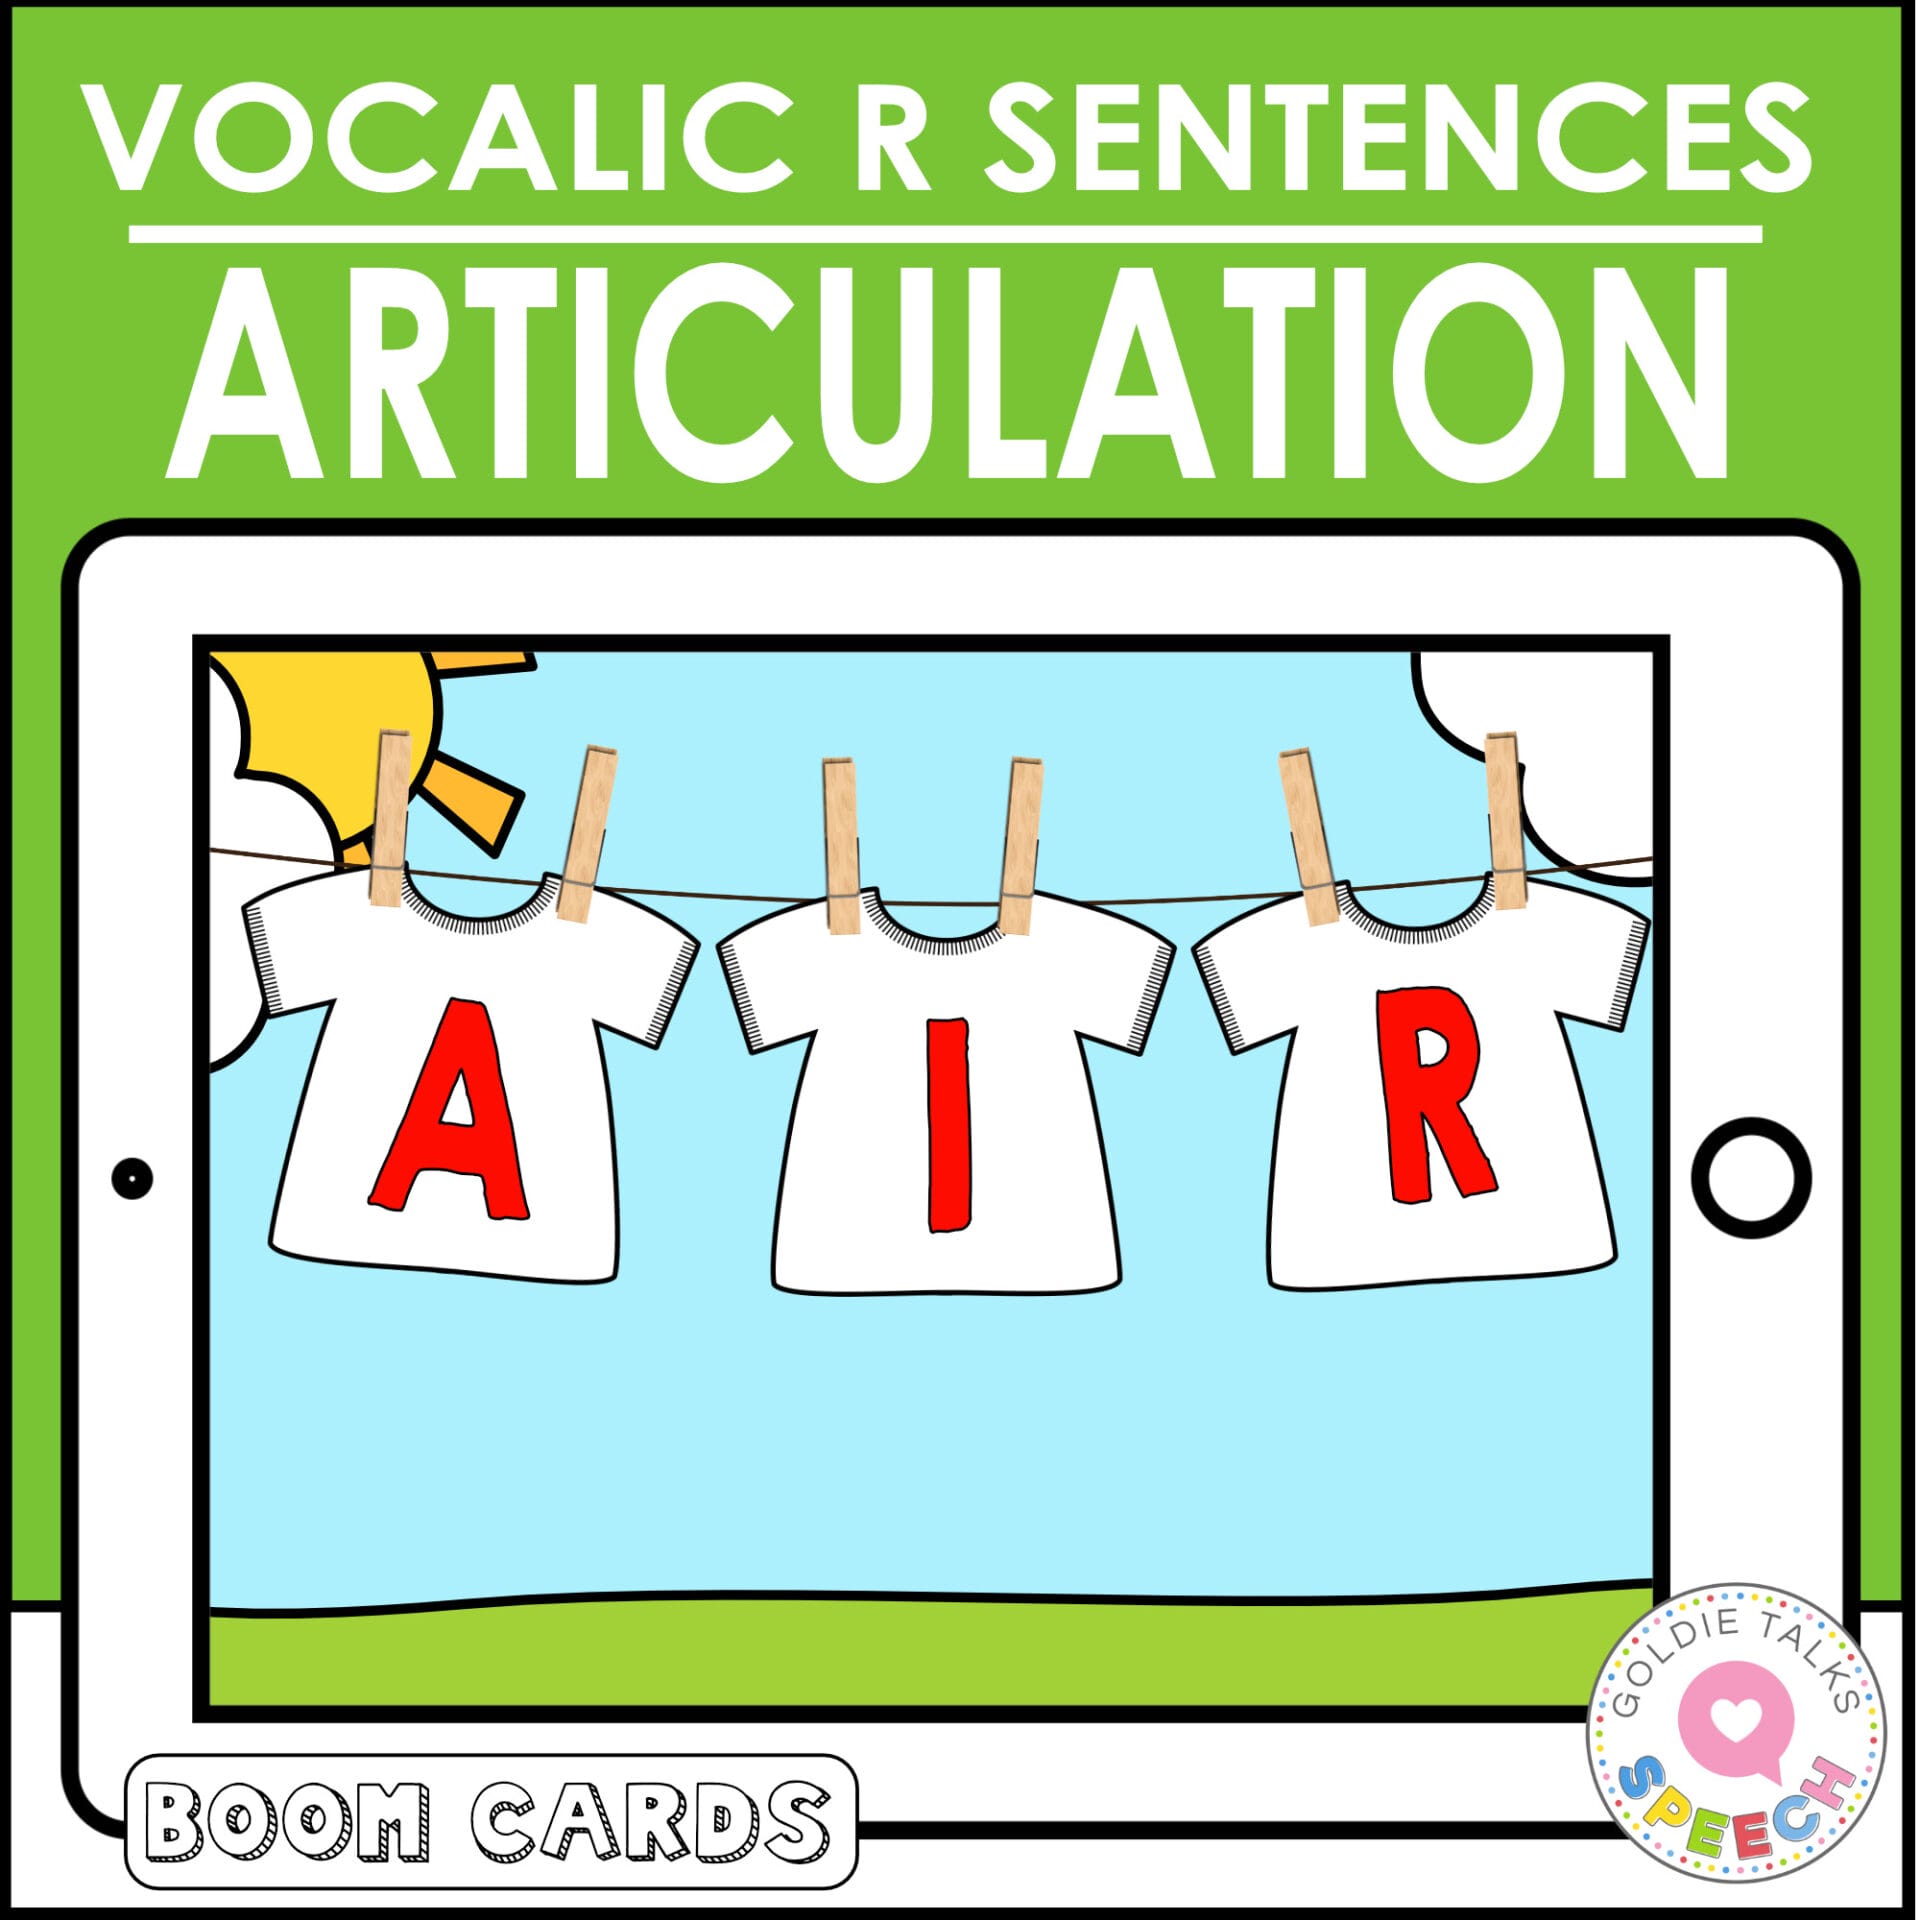 Free Boom Cards for Vocalic R Coarticulation Strategy